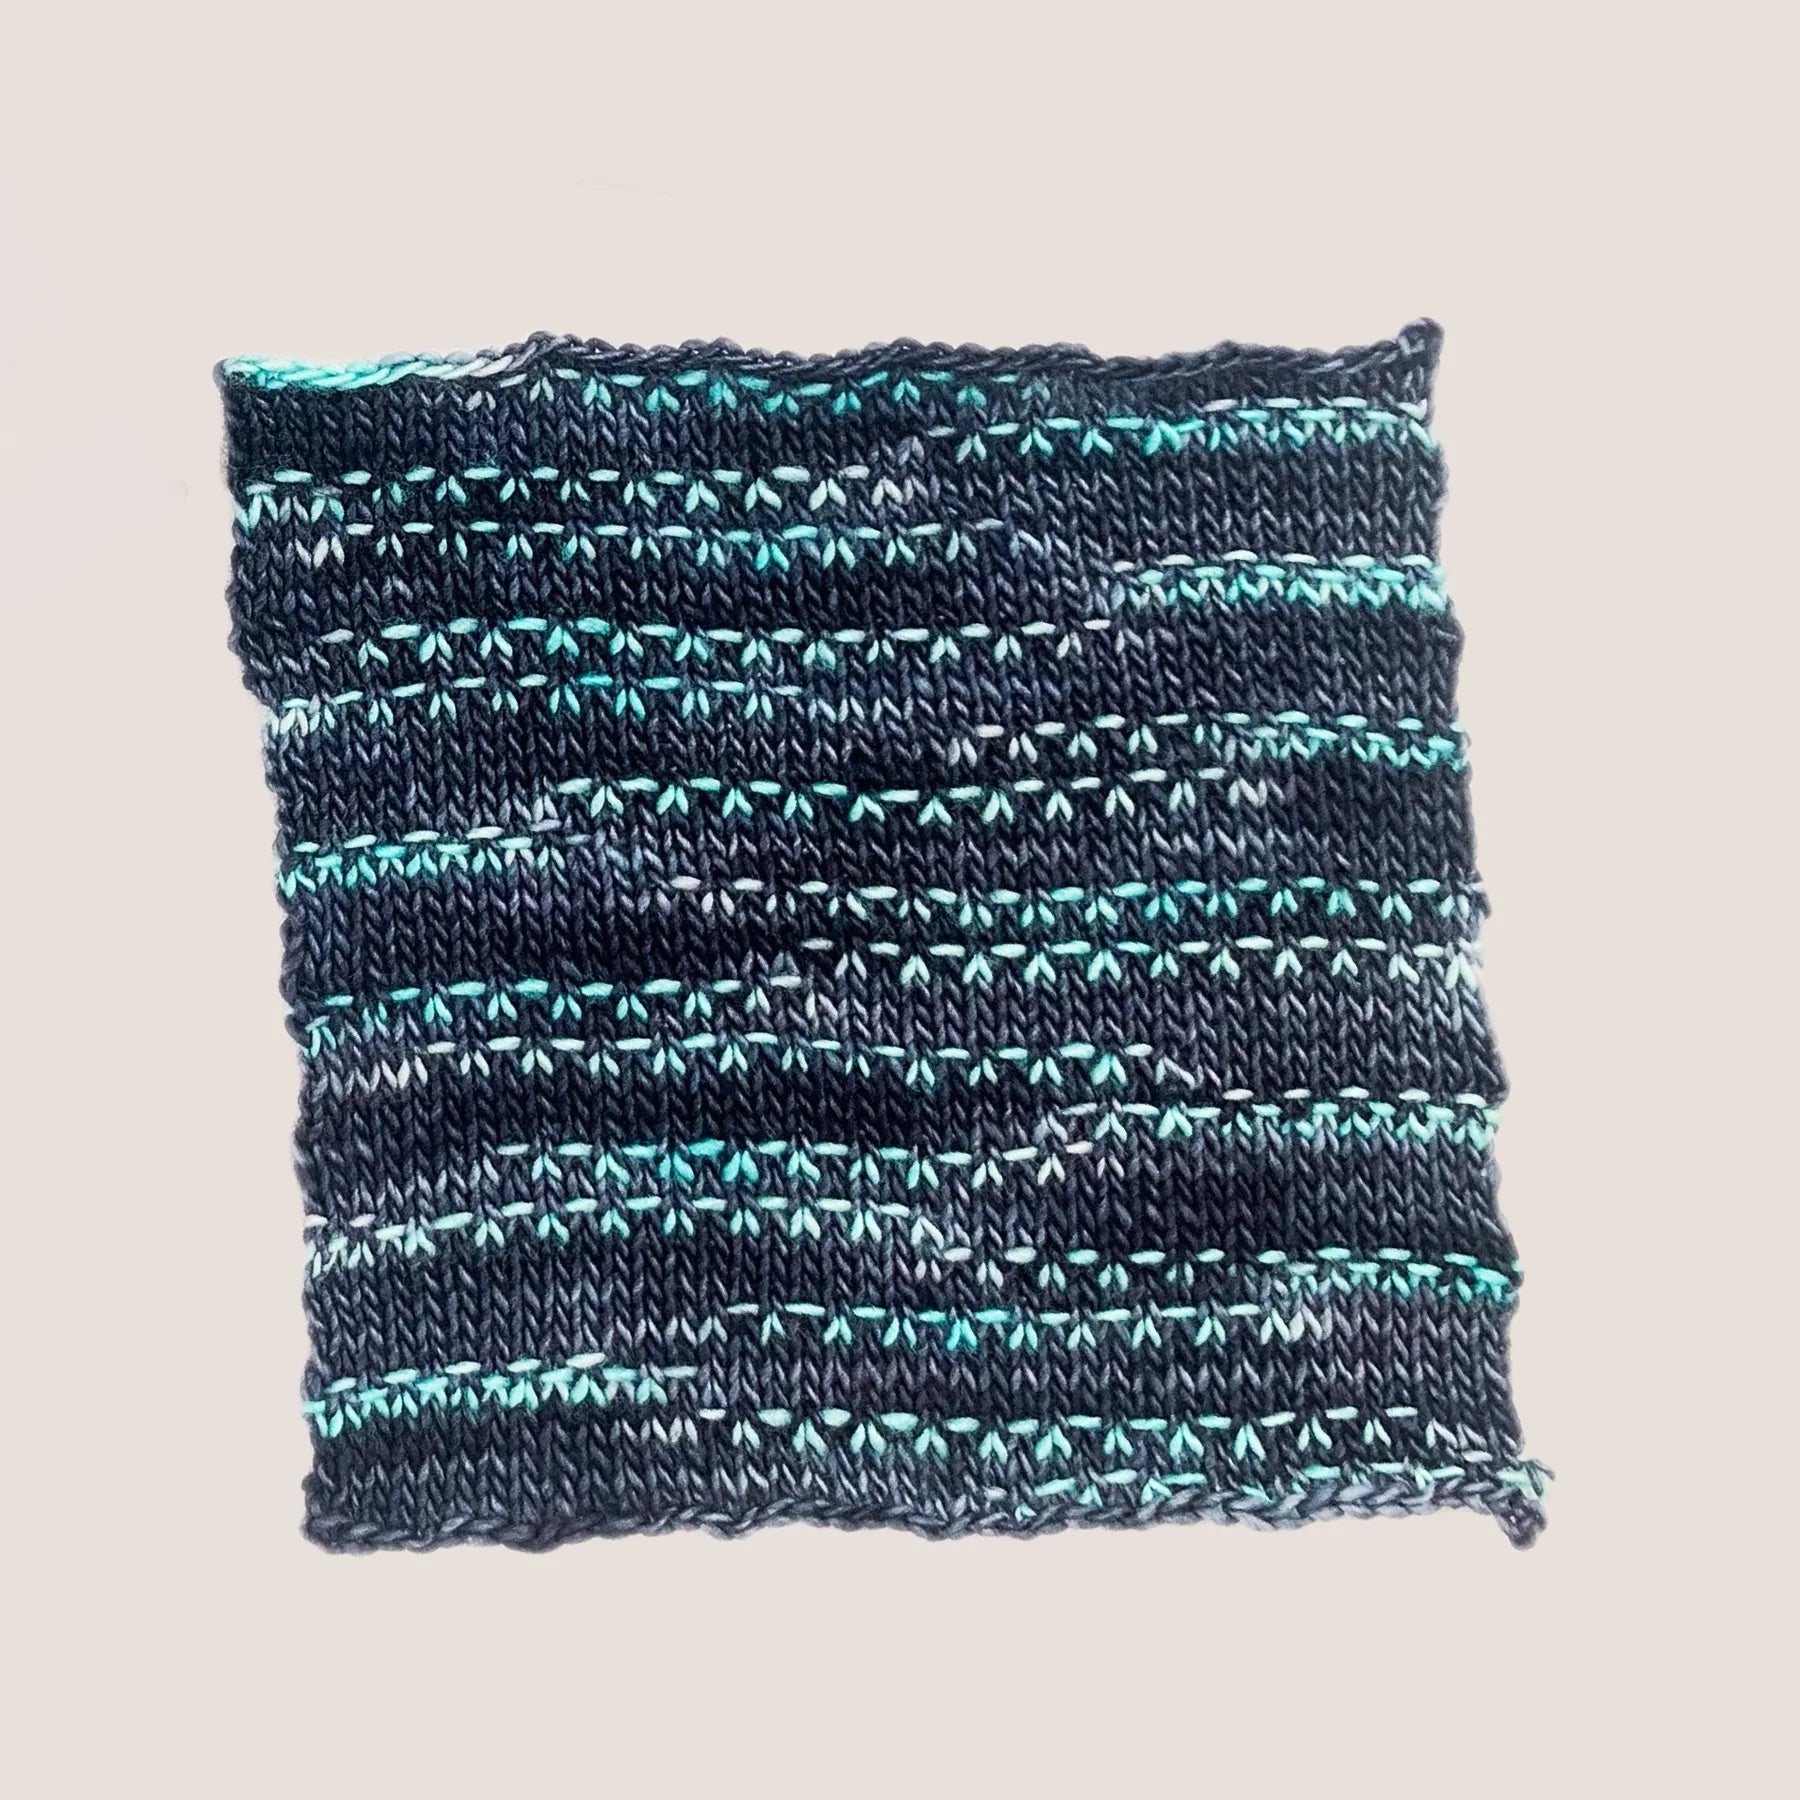 MadTosh x Barker Wool Assigned Pooling - homesewn